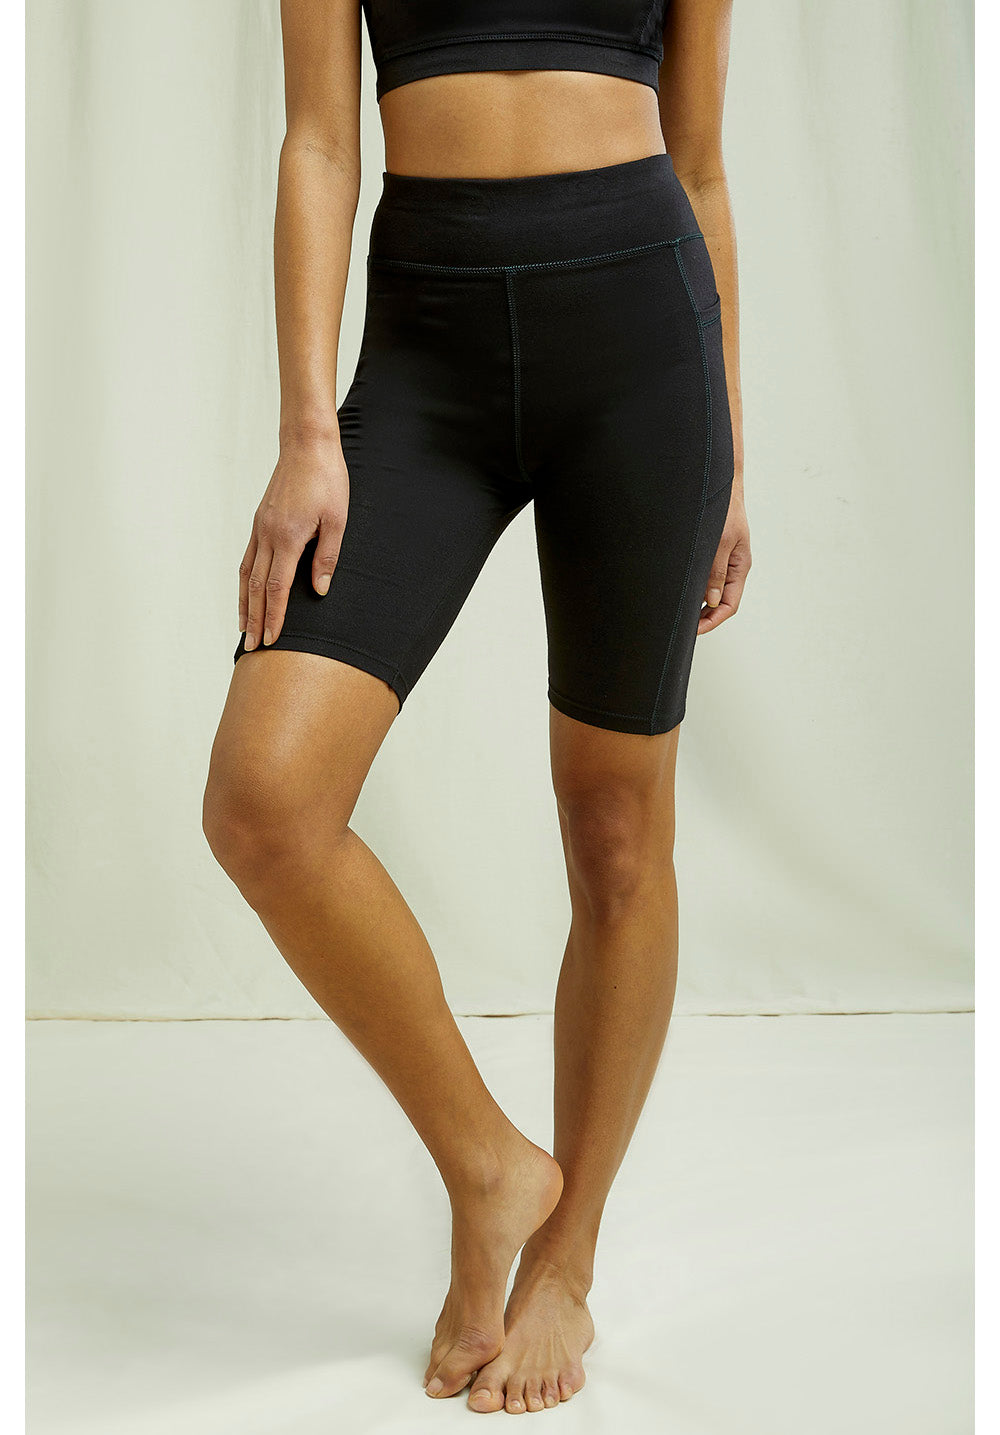 Organic Cotton Cycling Shorts in Black from People Tree